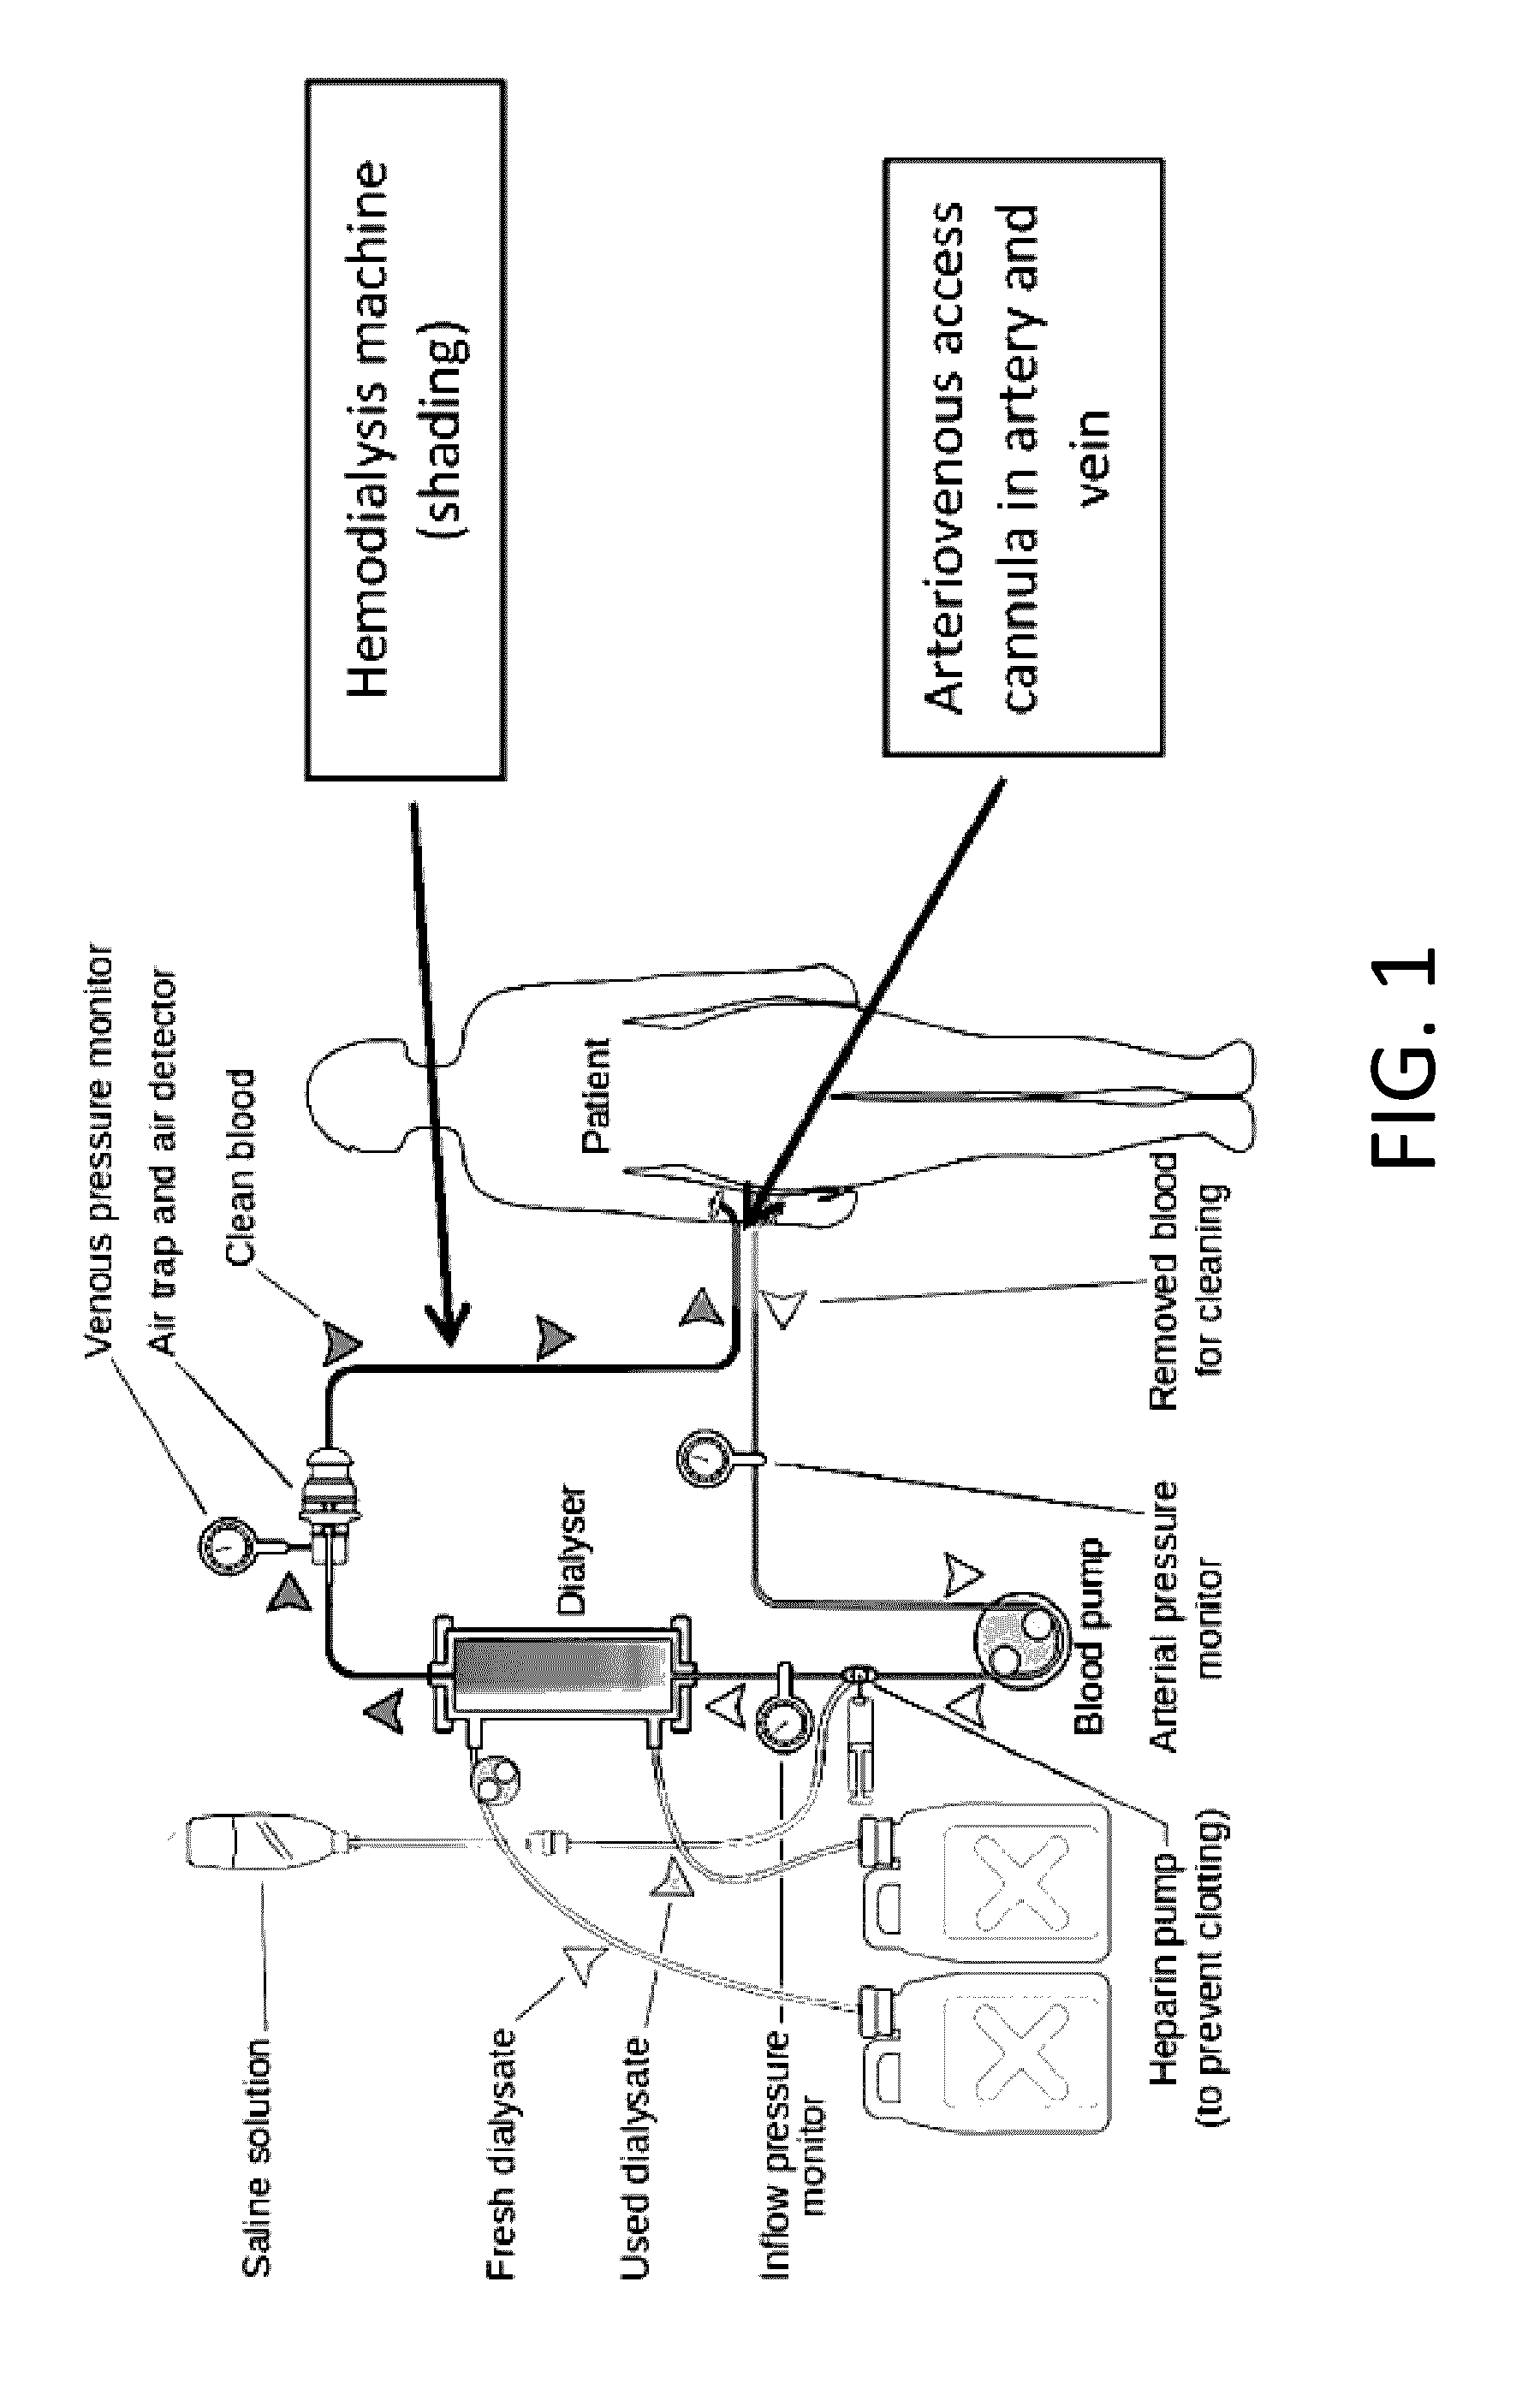 System and method for monitoring the health of dialysis patients